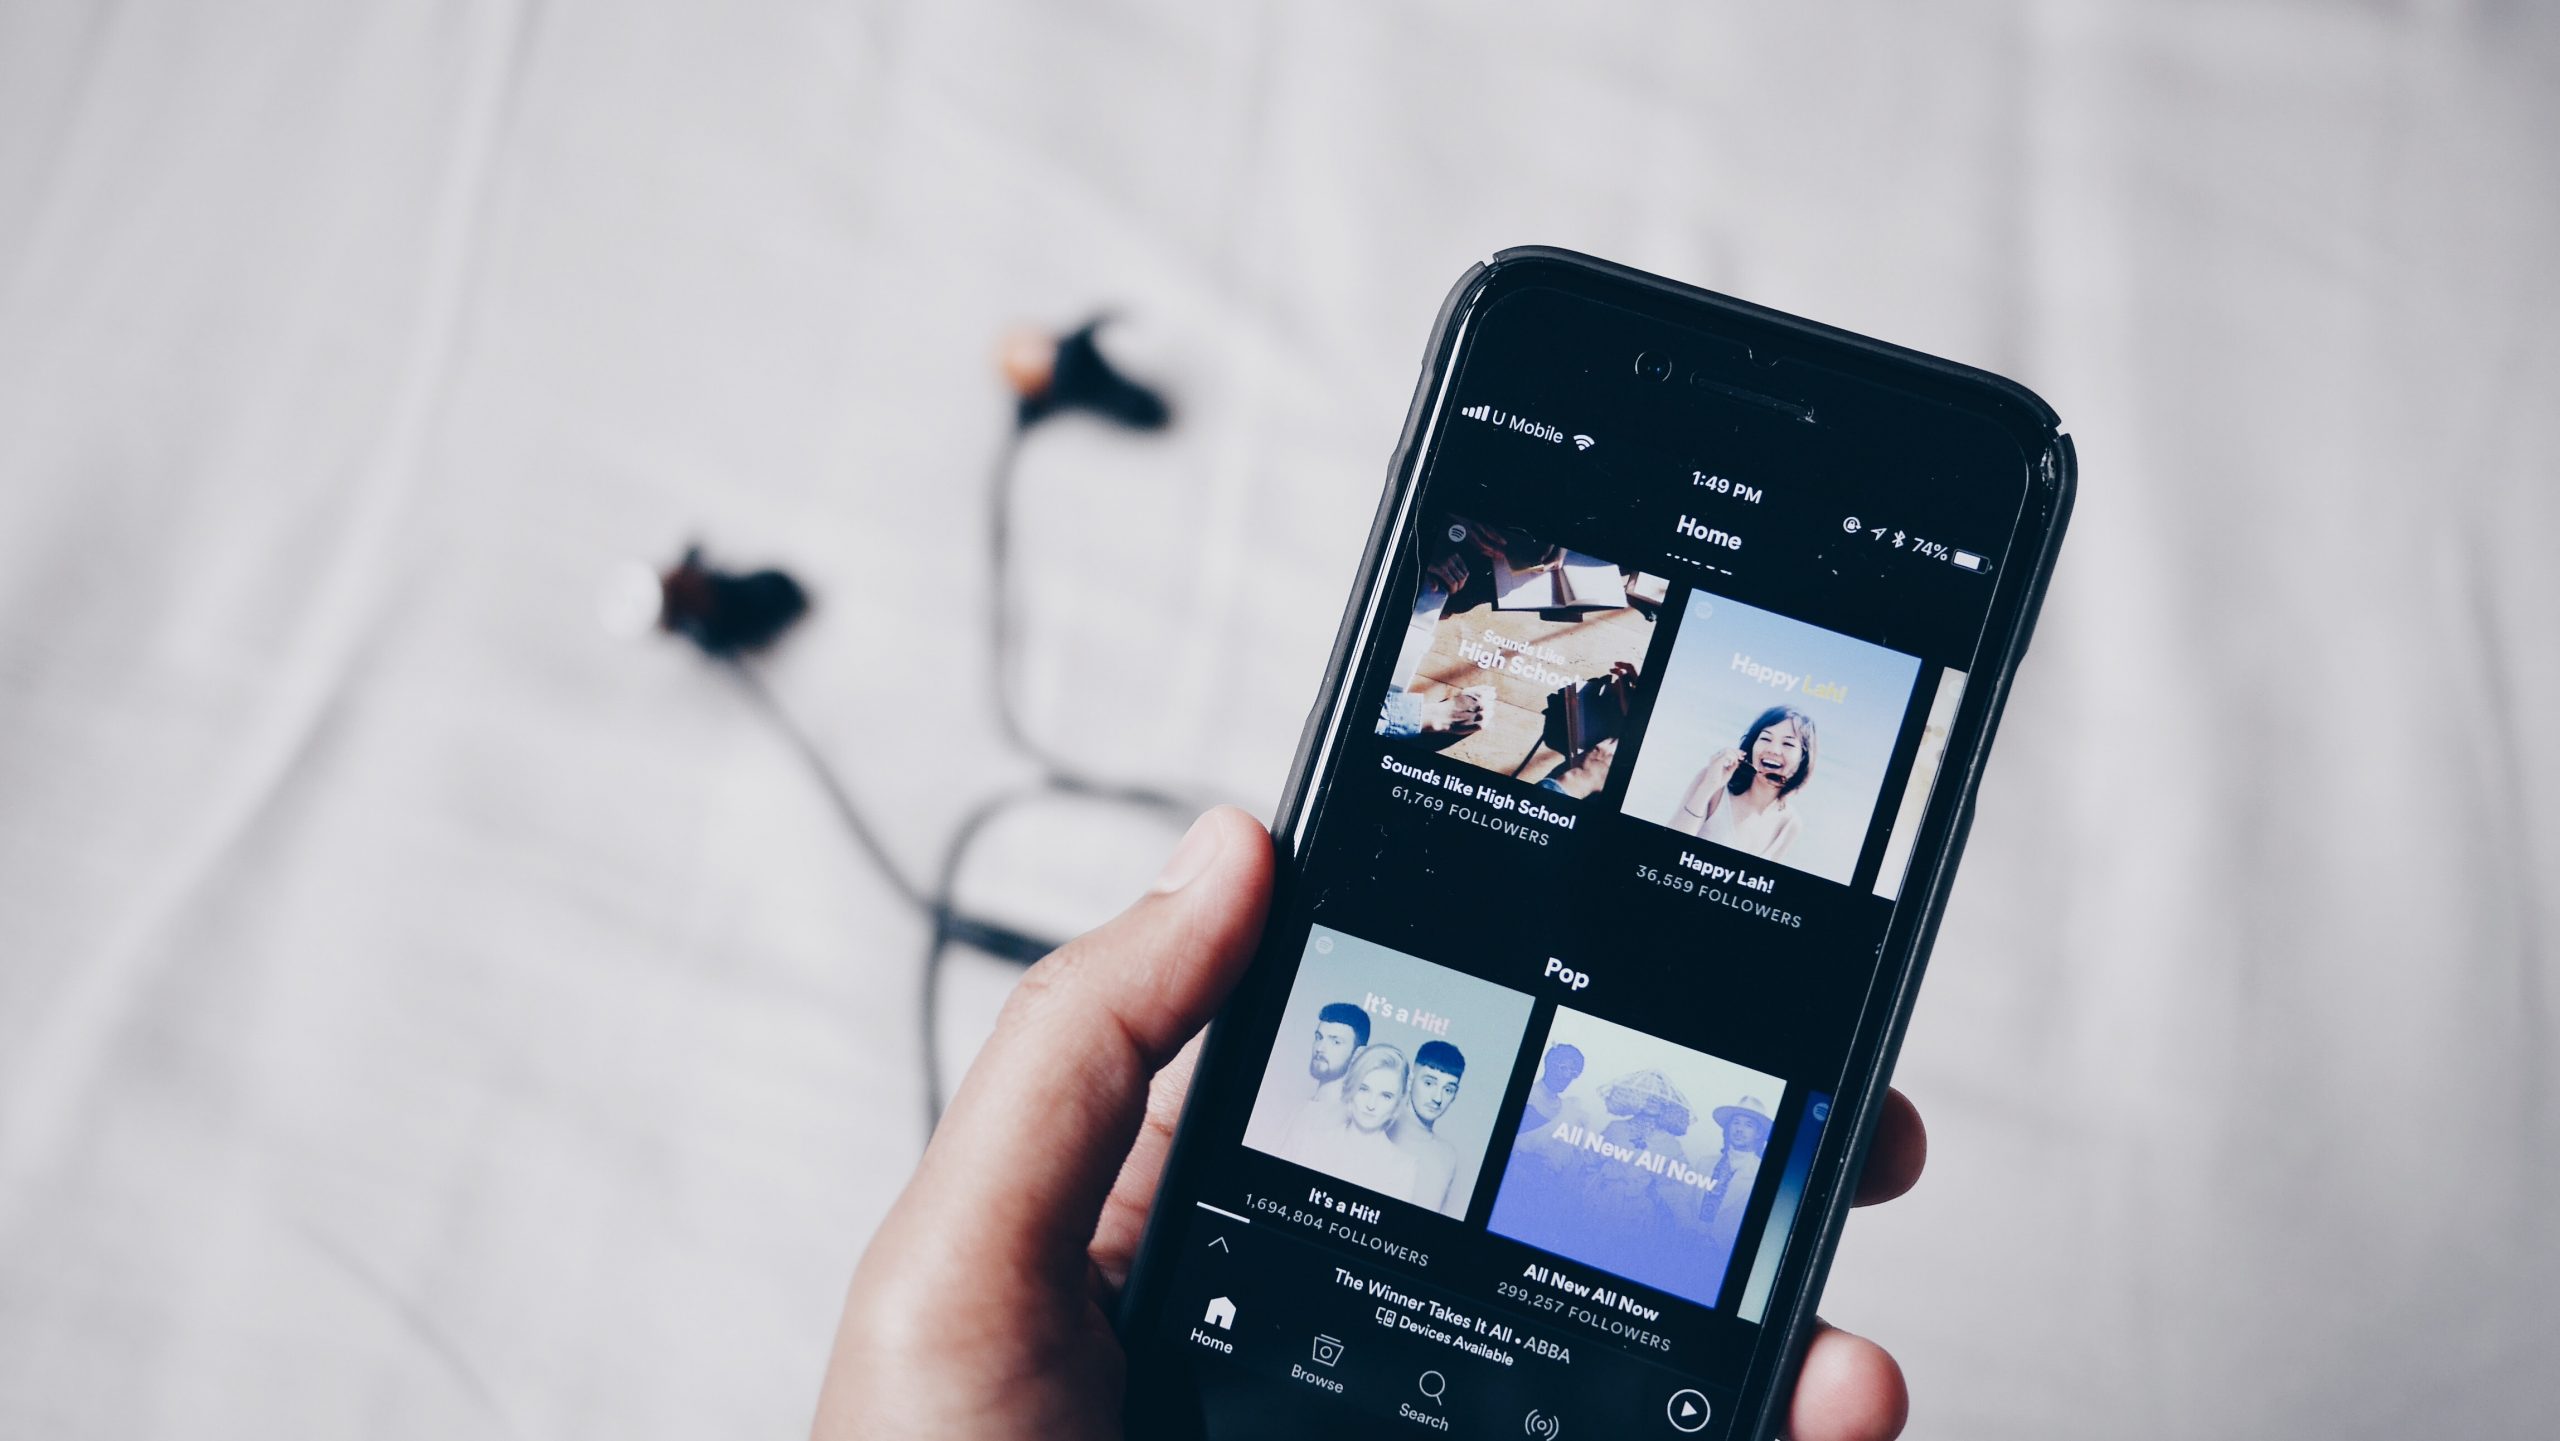 Spotify HiFi’s launch could be just around the corner